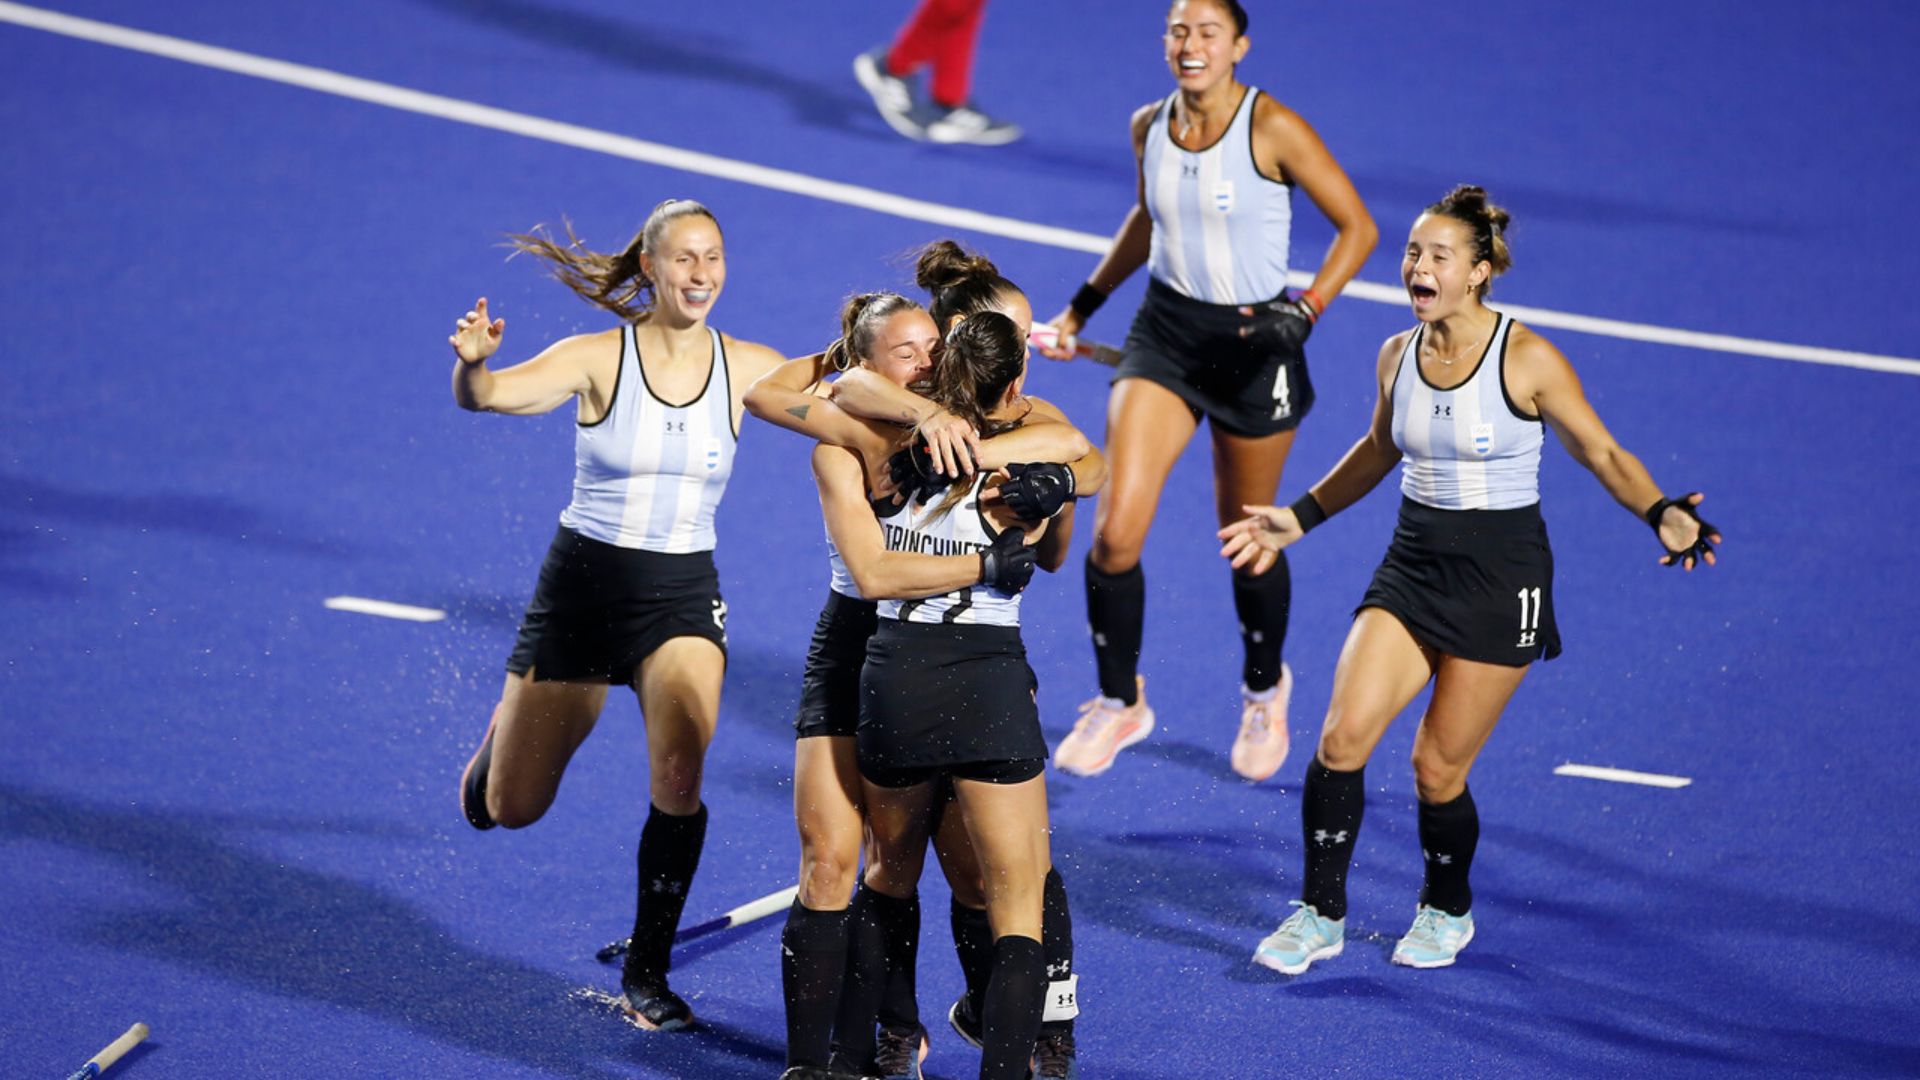 Argentina Successfully Defends Pan American Gold in Female's Field Hockey